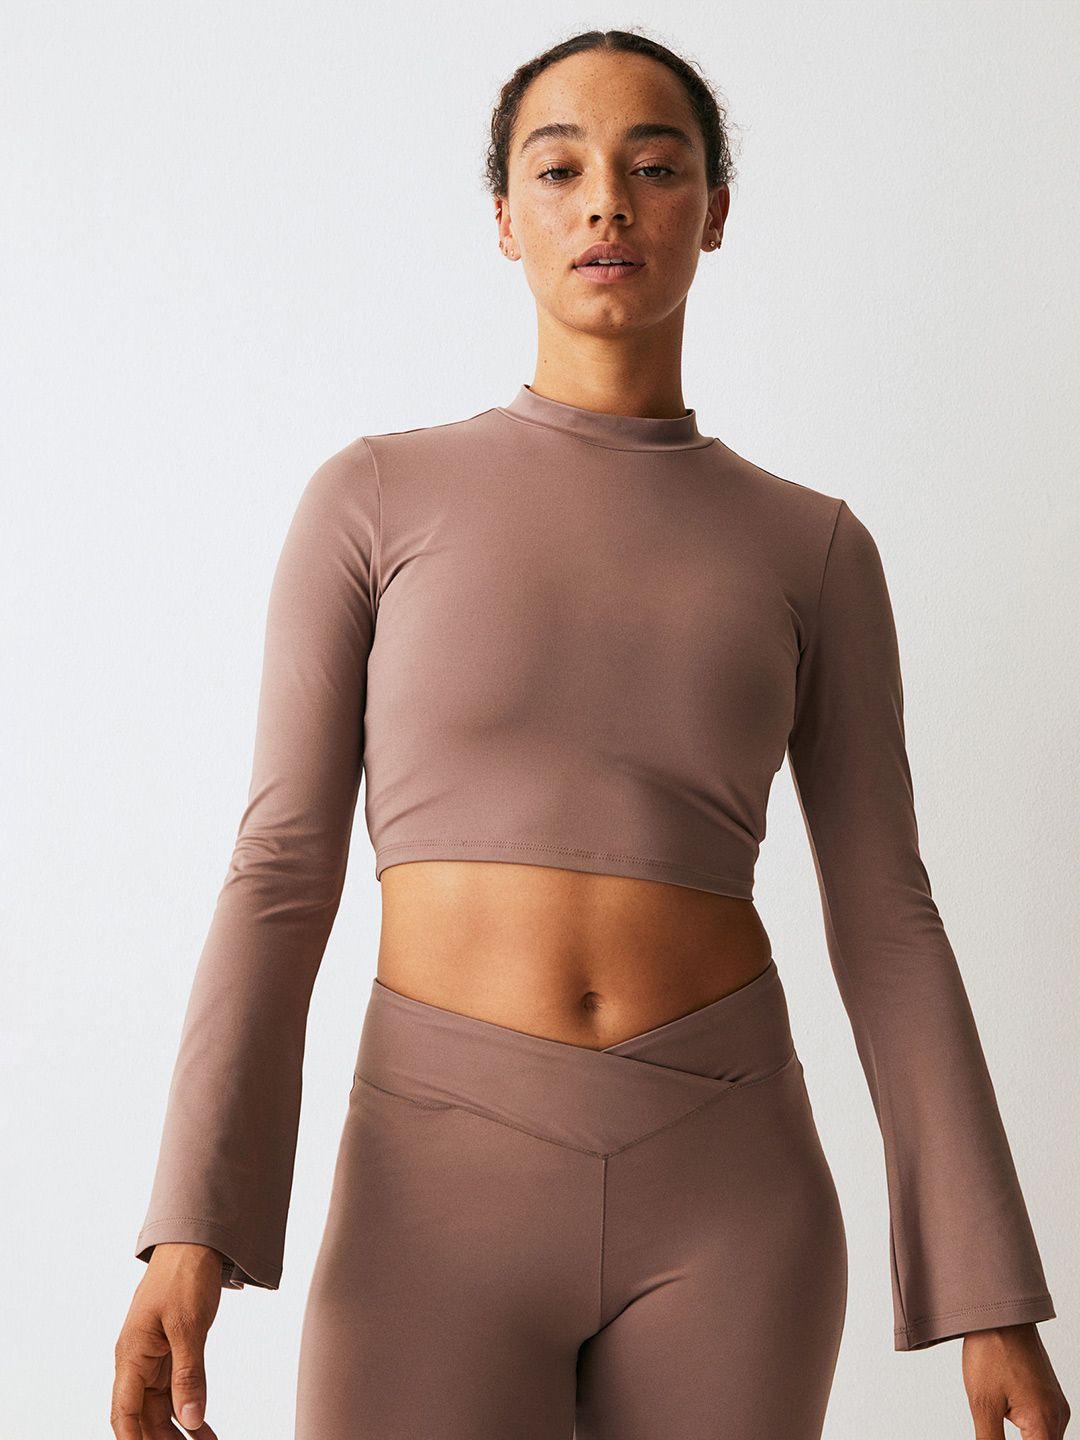 h&m-softmove-cropped-sports-top